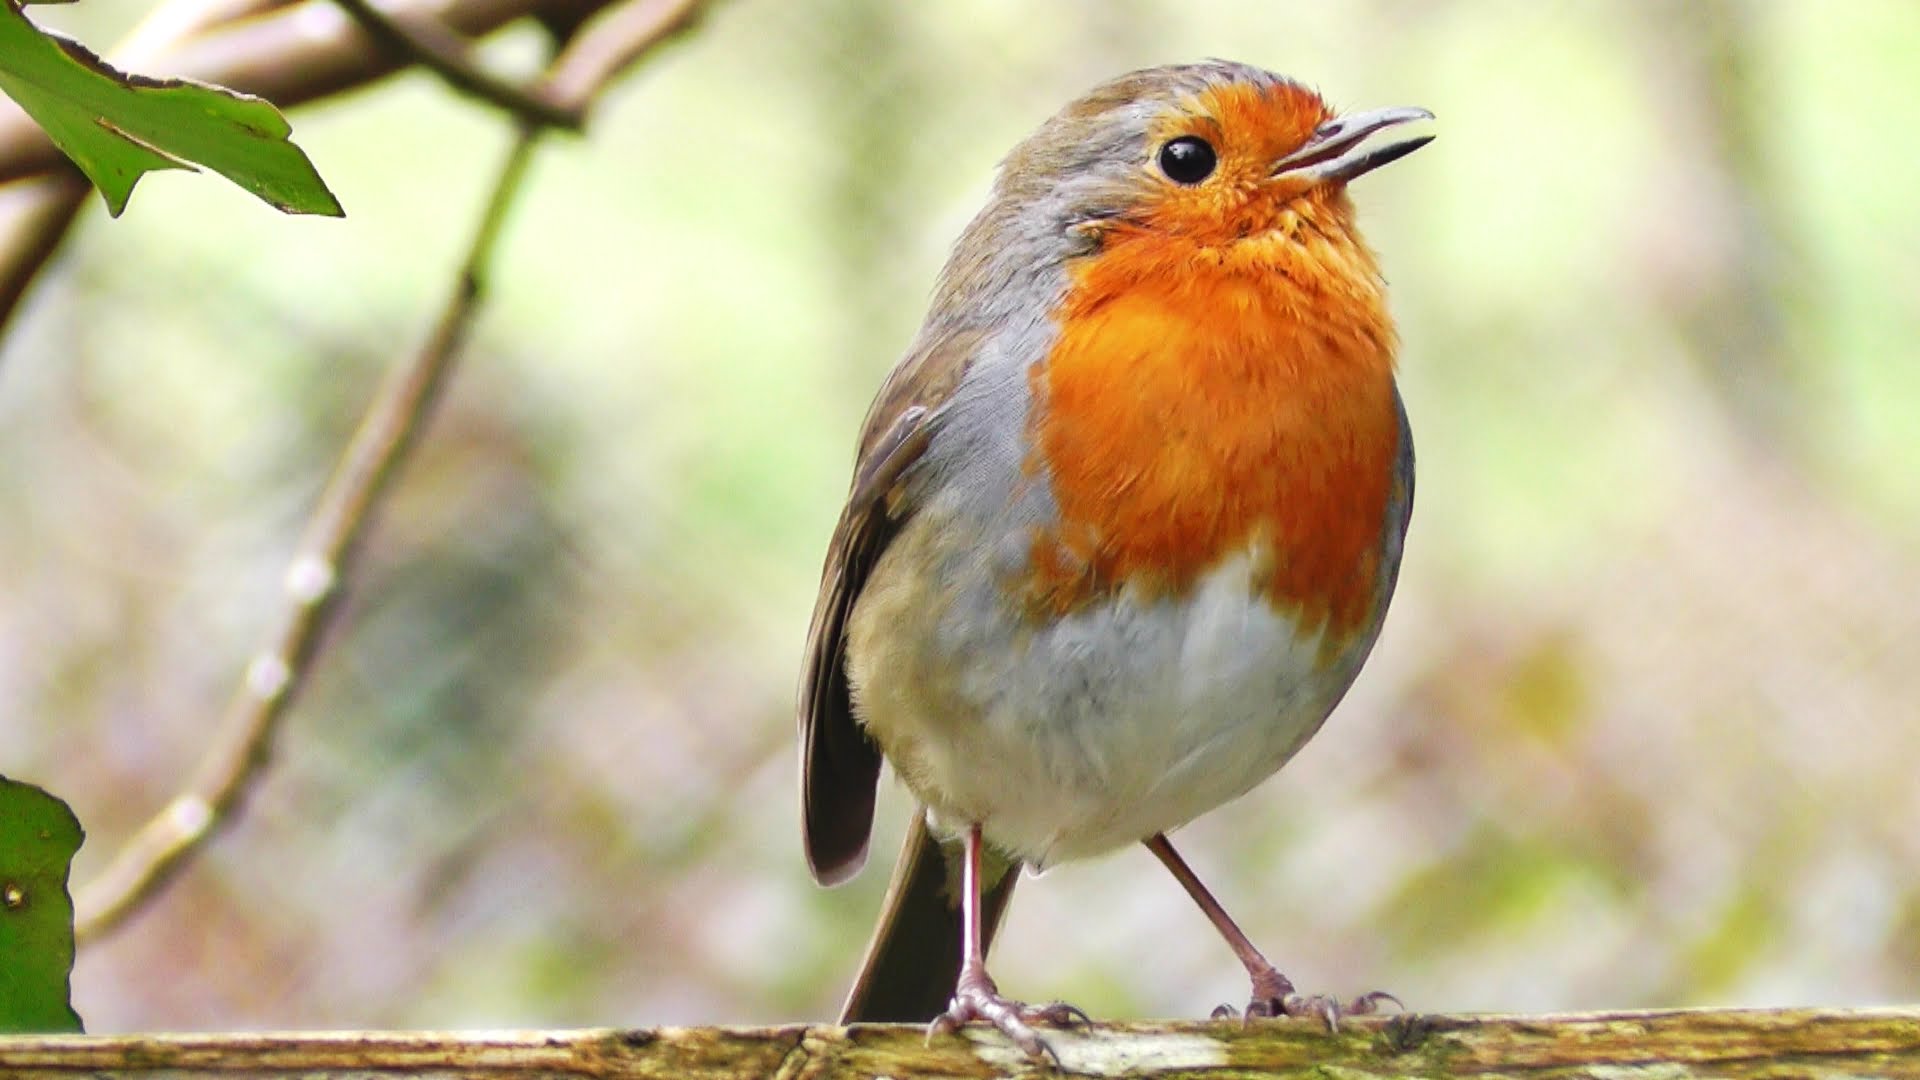 Robin Birds Chirping and Singing - Relaxing Video, Bird Song and Nature Sounds in HD